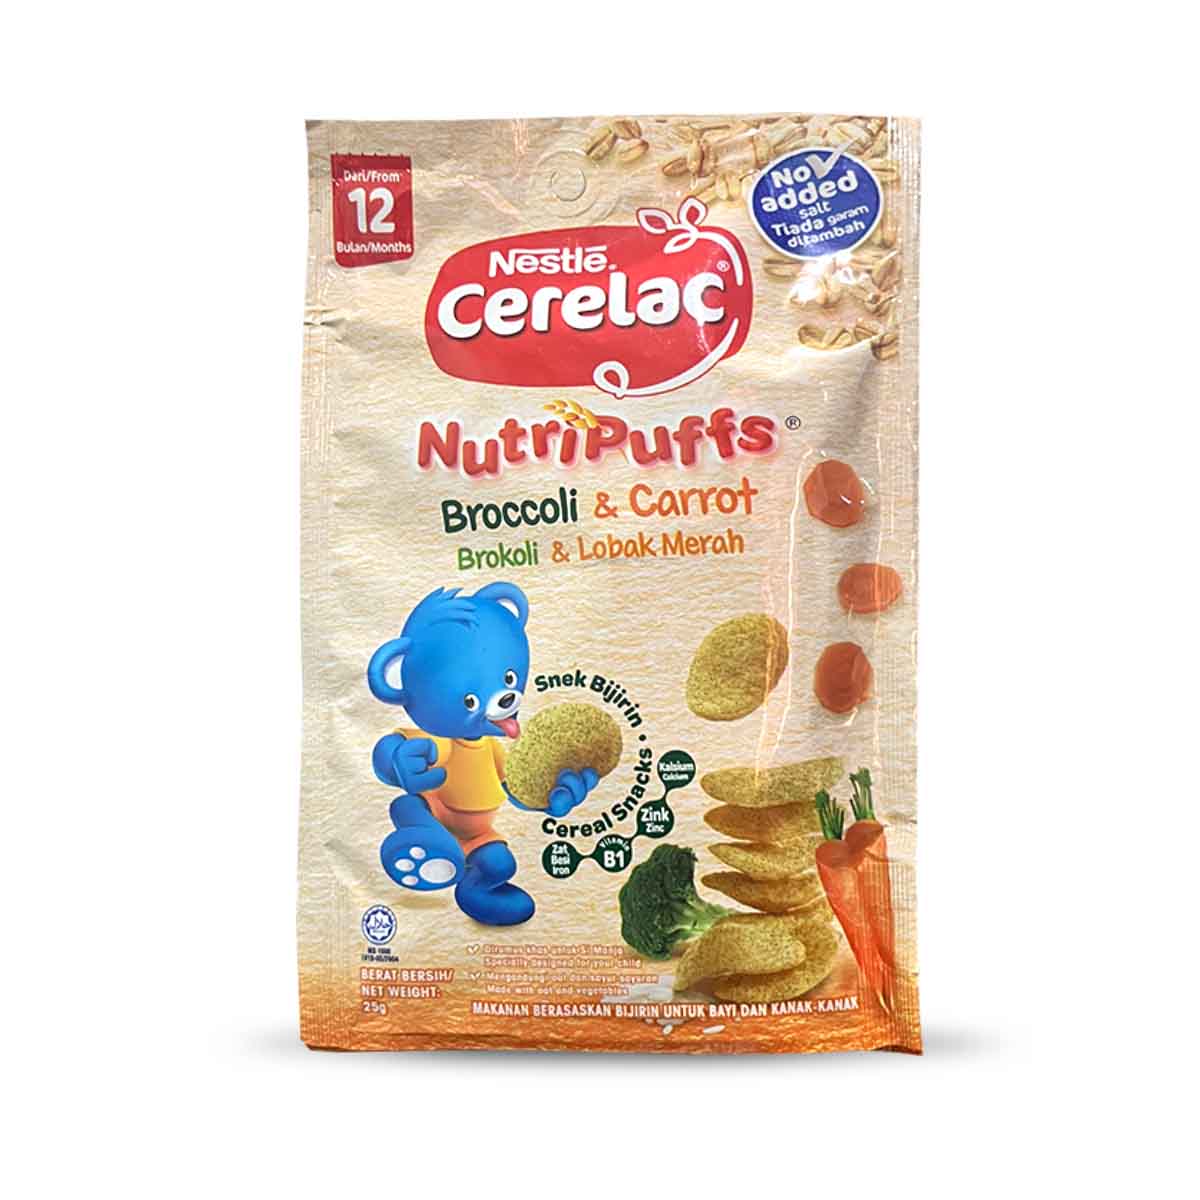 Buy Nestle Cerelac Nutri Puffs with Broccoli & Carrot - 25gms Online in India at uyyaala.com